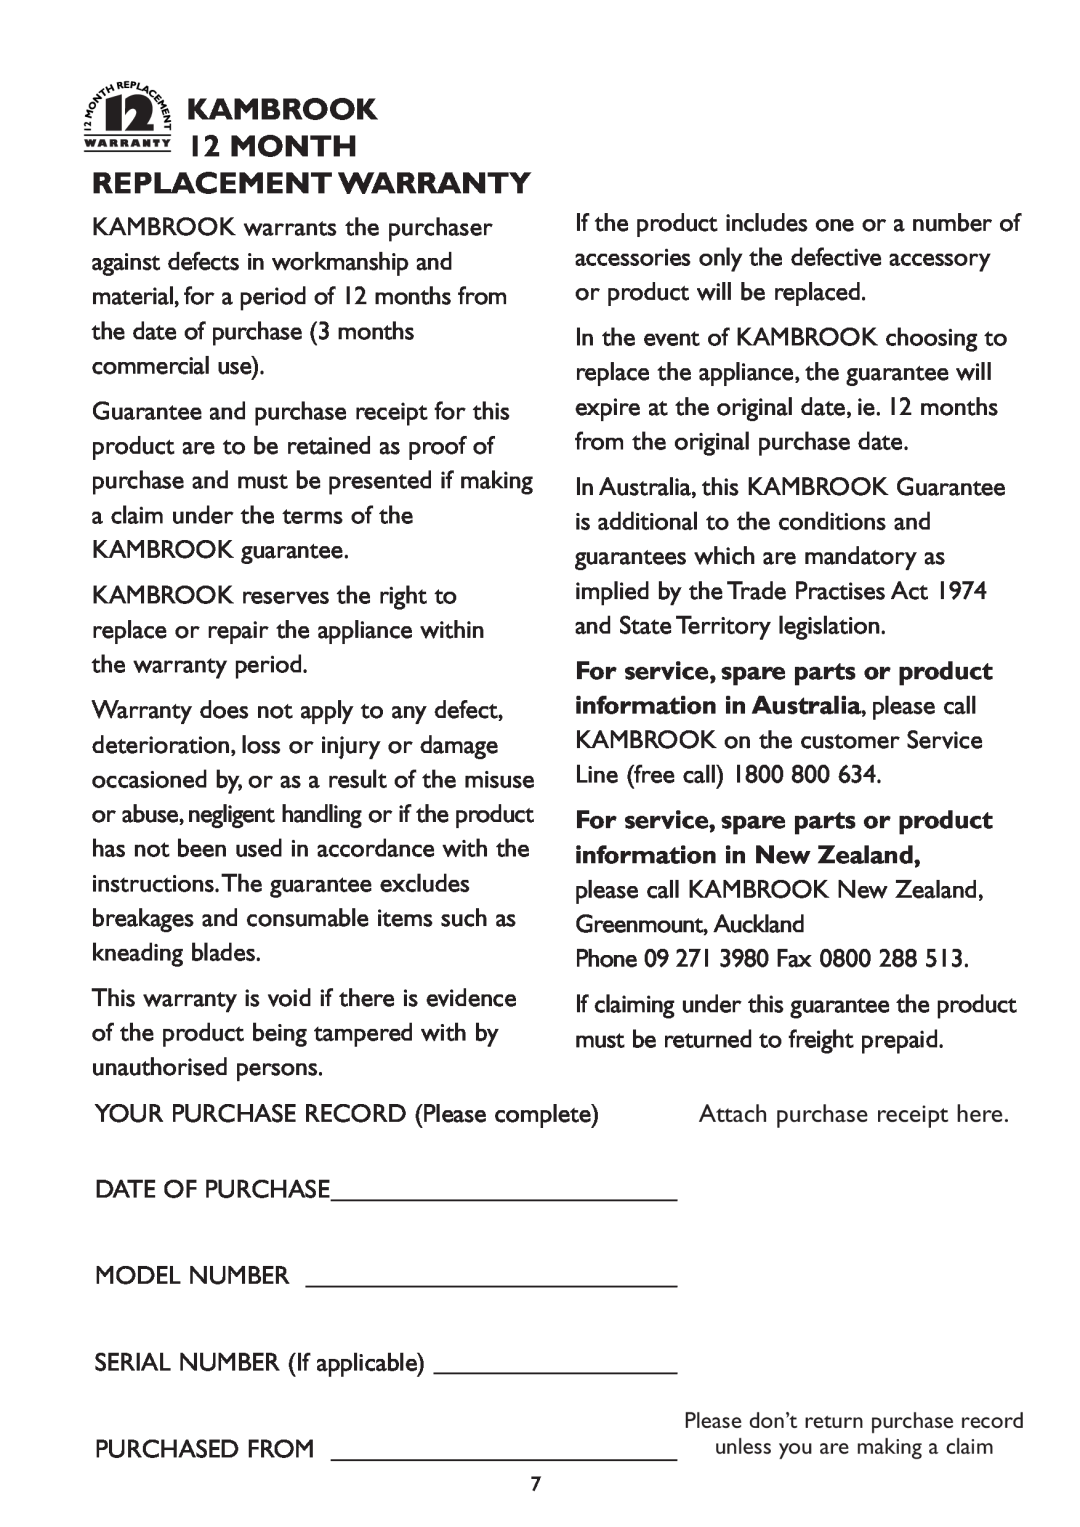 Kambrook KOM2 Replacement Warranty, For service, spare parts or product information in New Zealand, KAMBROOK 12 MONTH 